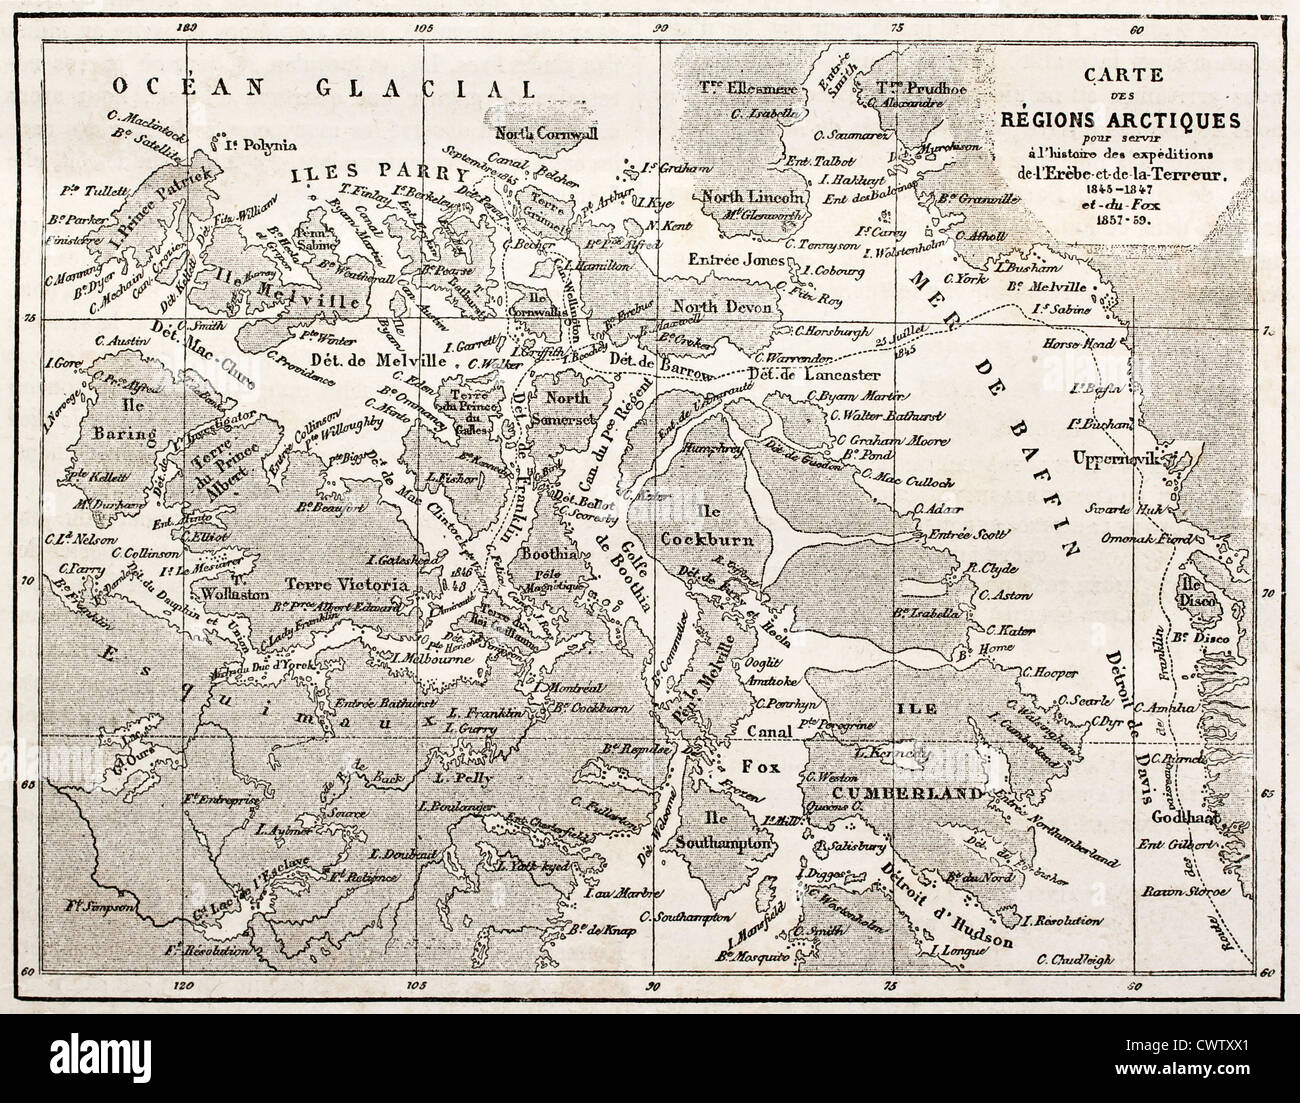 Old map of Arctic region Stock Photo